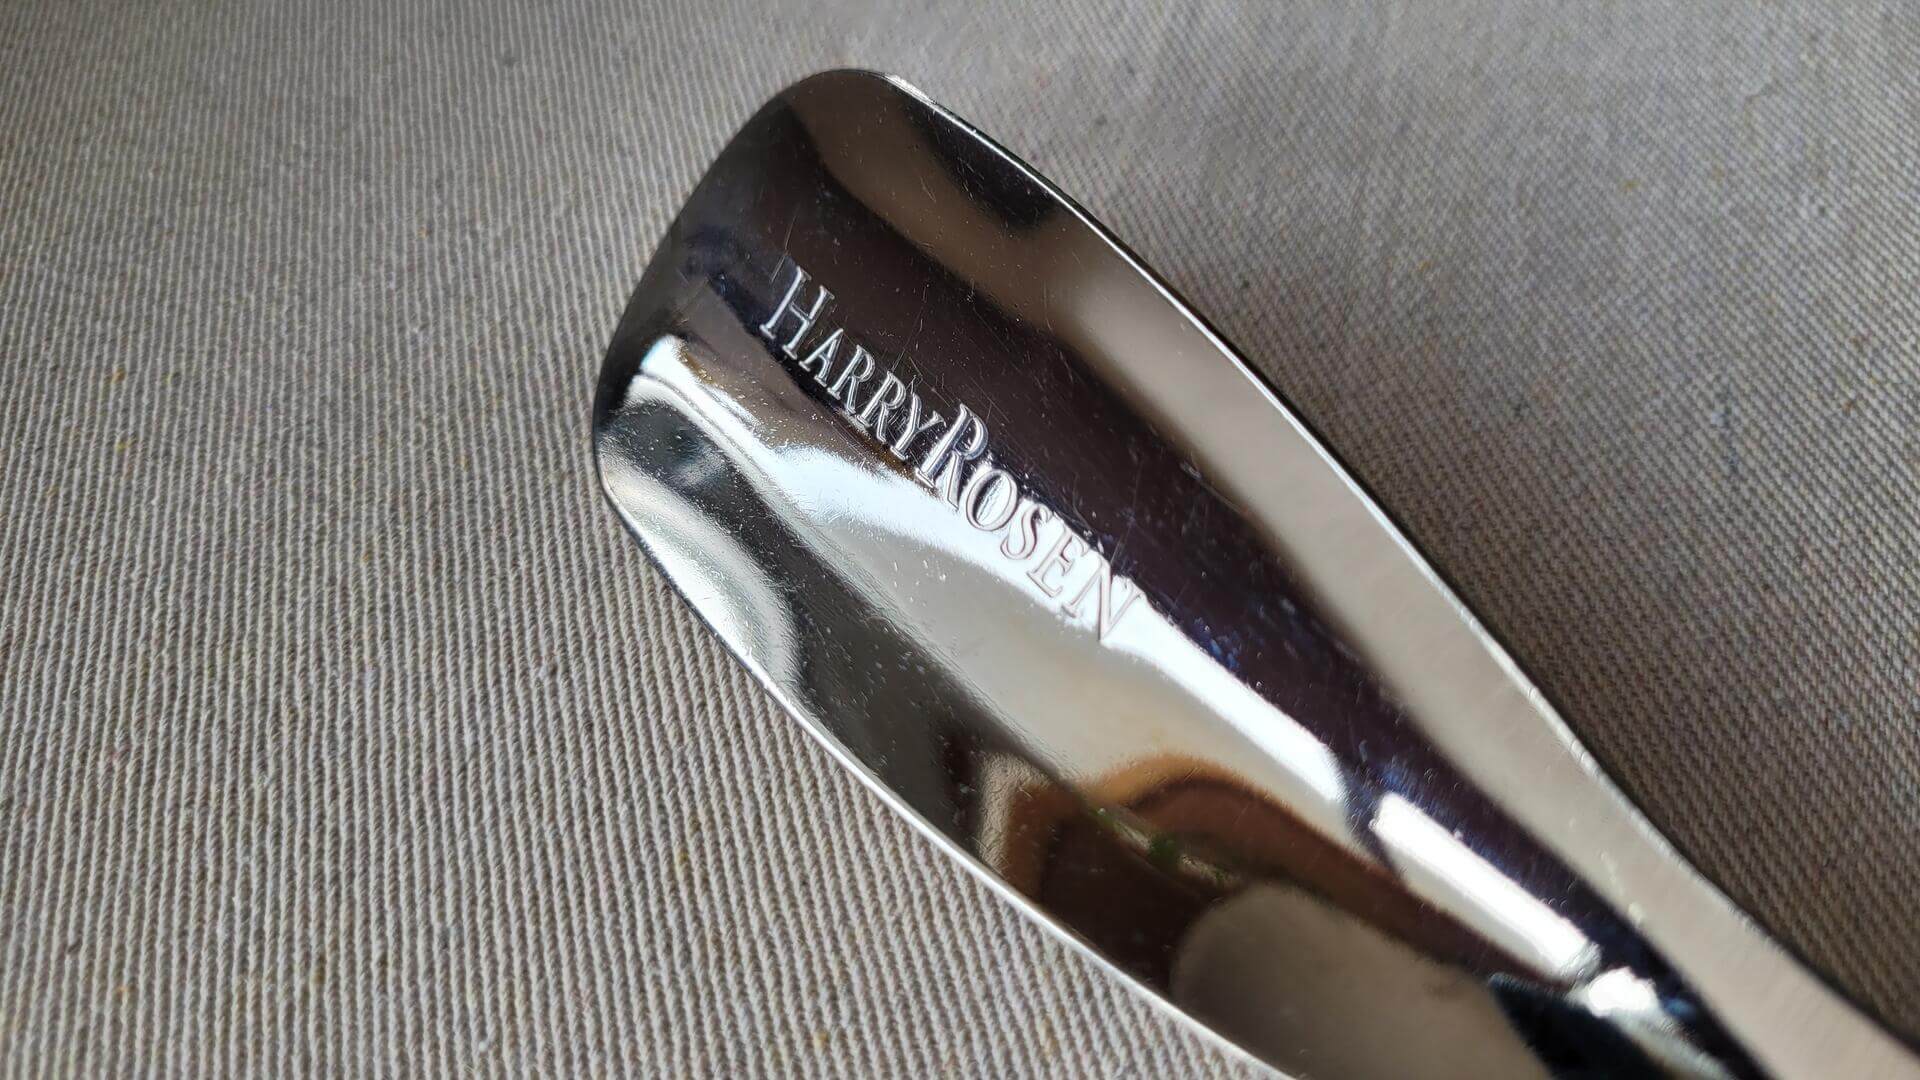 Vintage Pro Fitters stainless steel shoe horn engraved for Harry Rozen, Canadian luxury wear store. Rare fine made in USA collectible shoe accessories